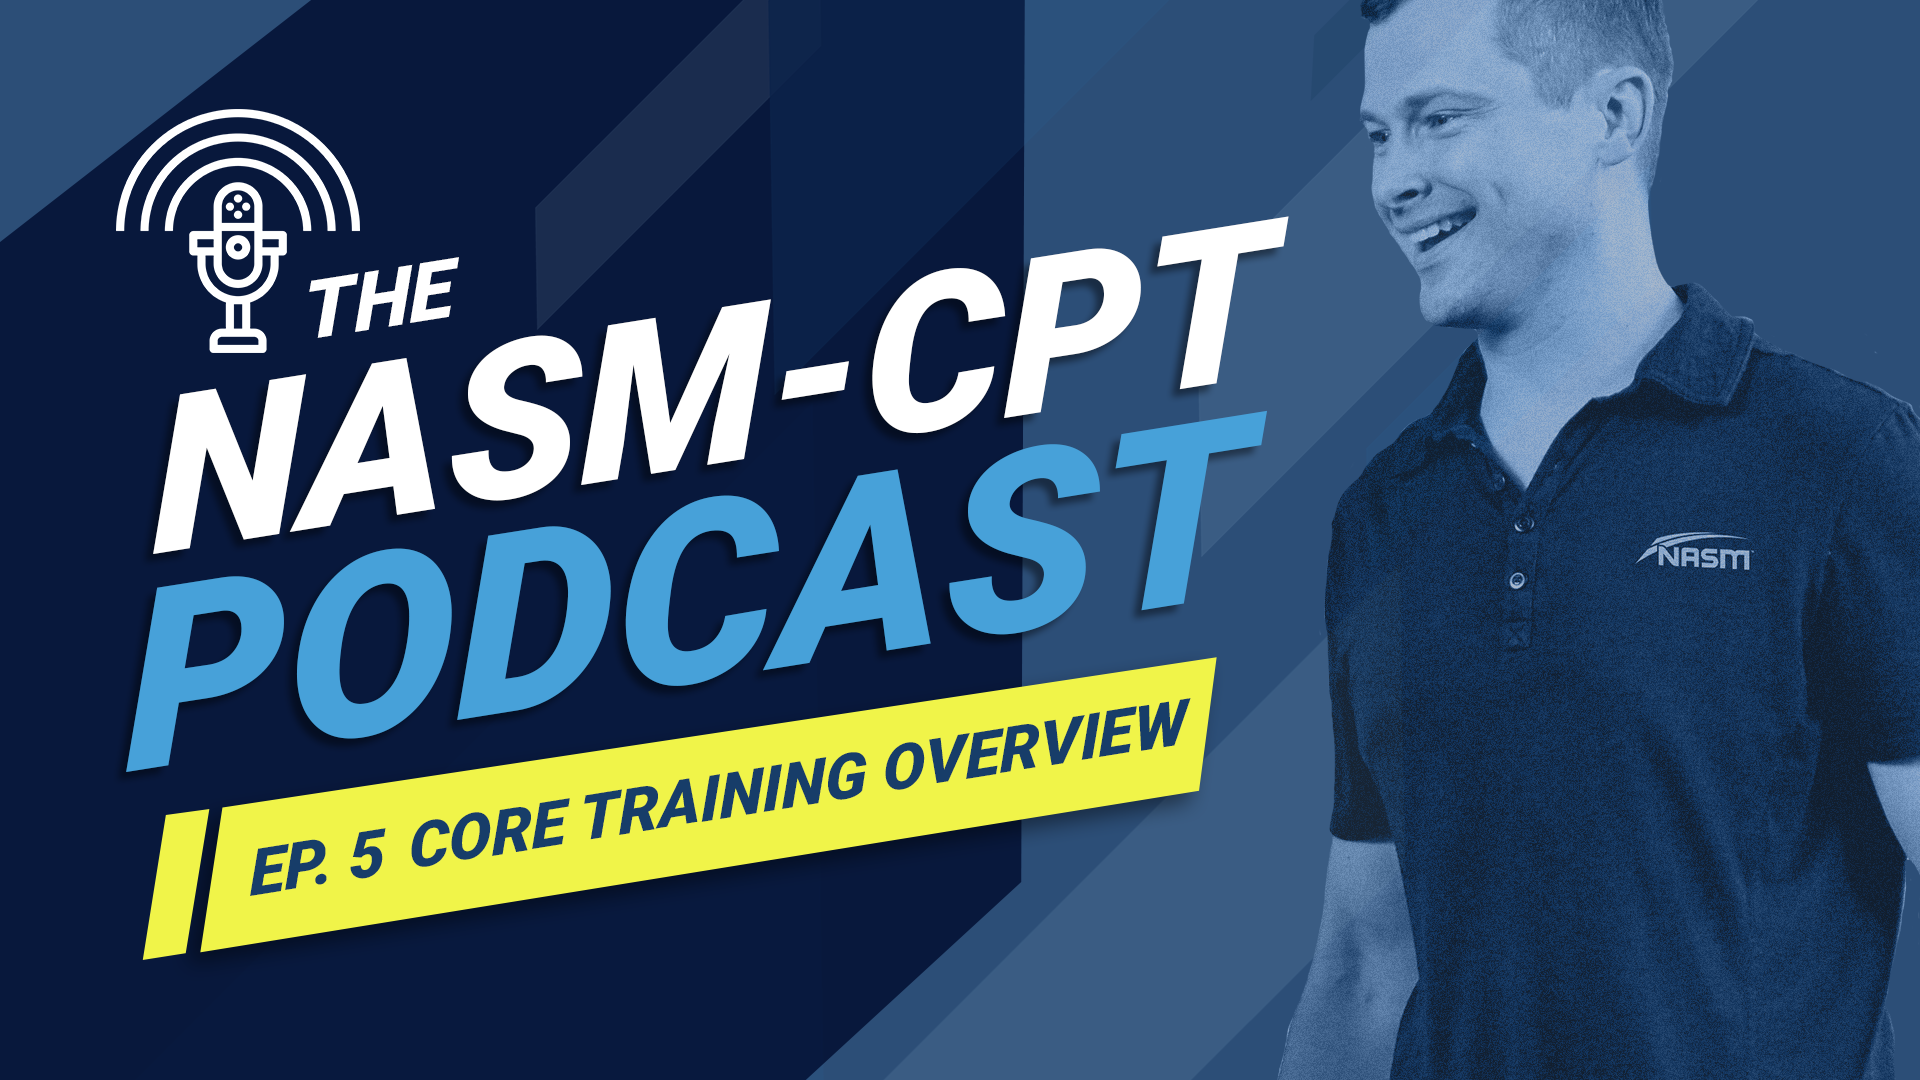 The NASM-CPT Podcast Ep. 5 Core Training Overview